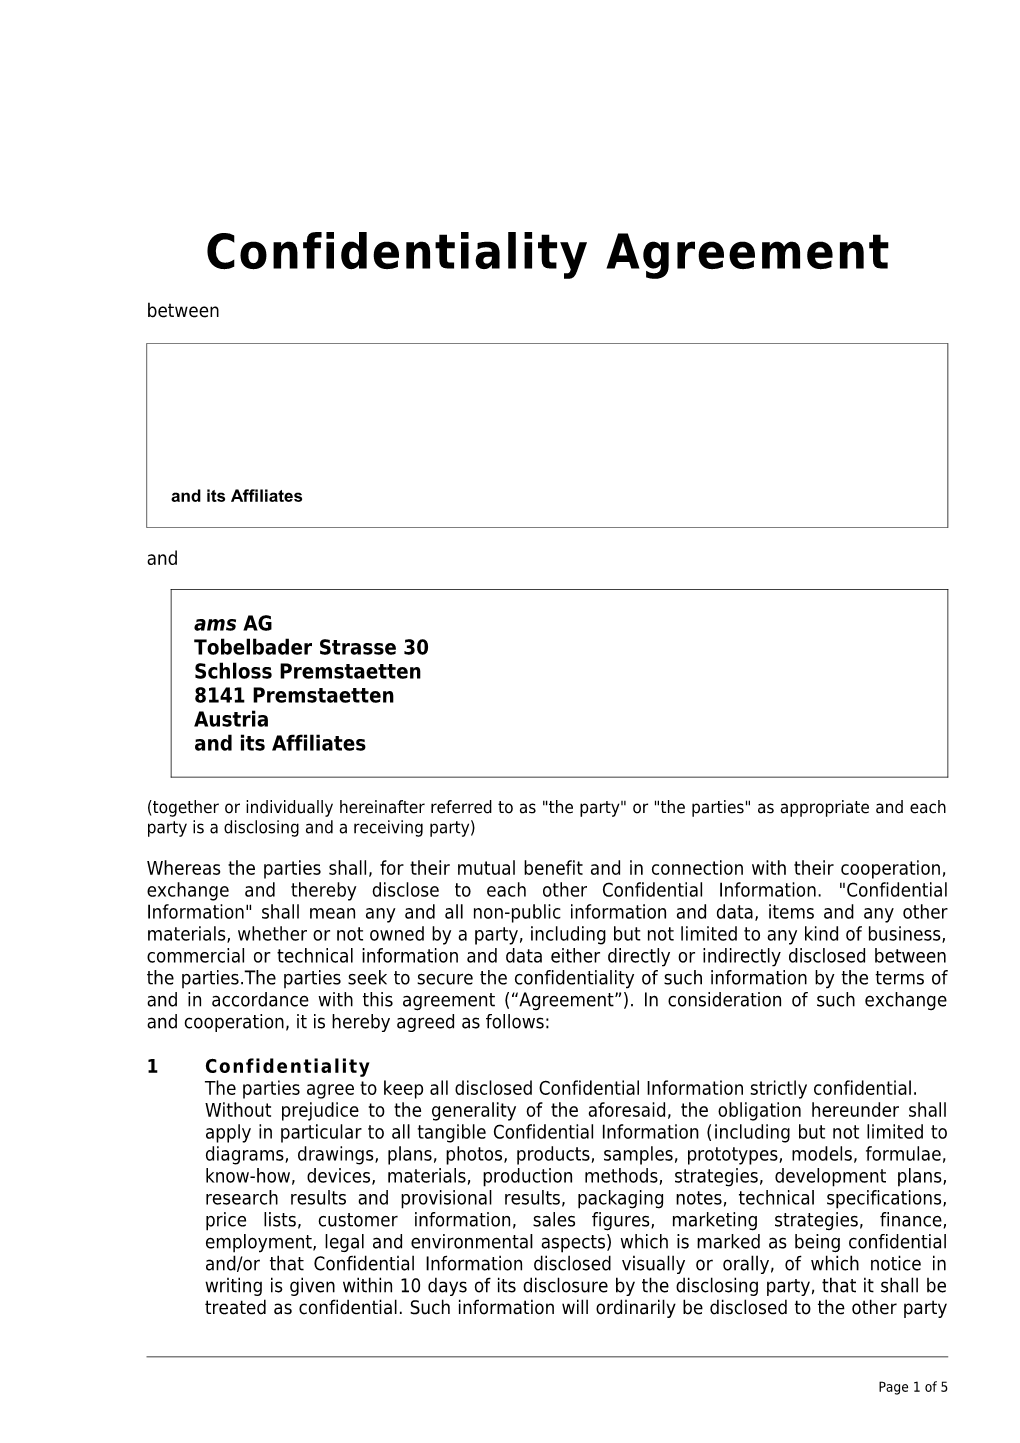 Confidentiality Agreement s10